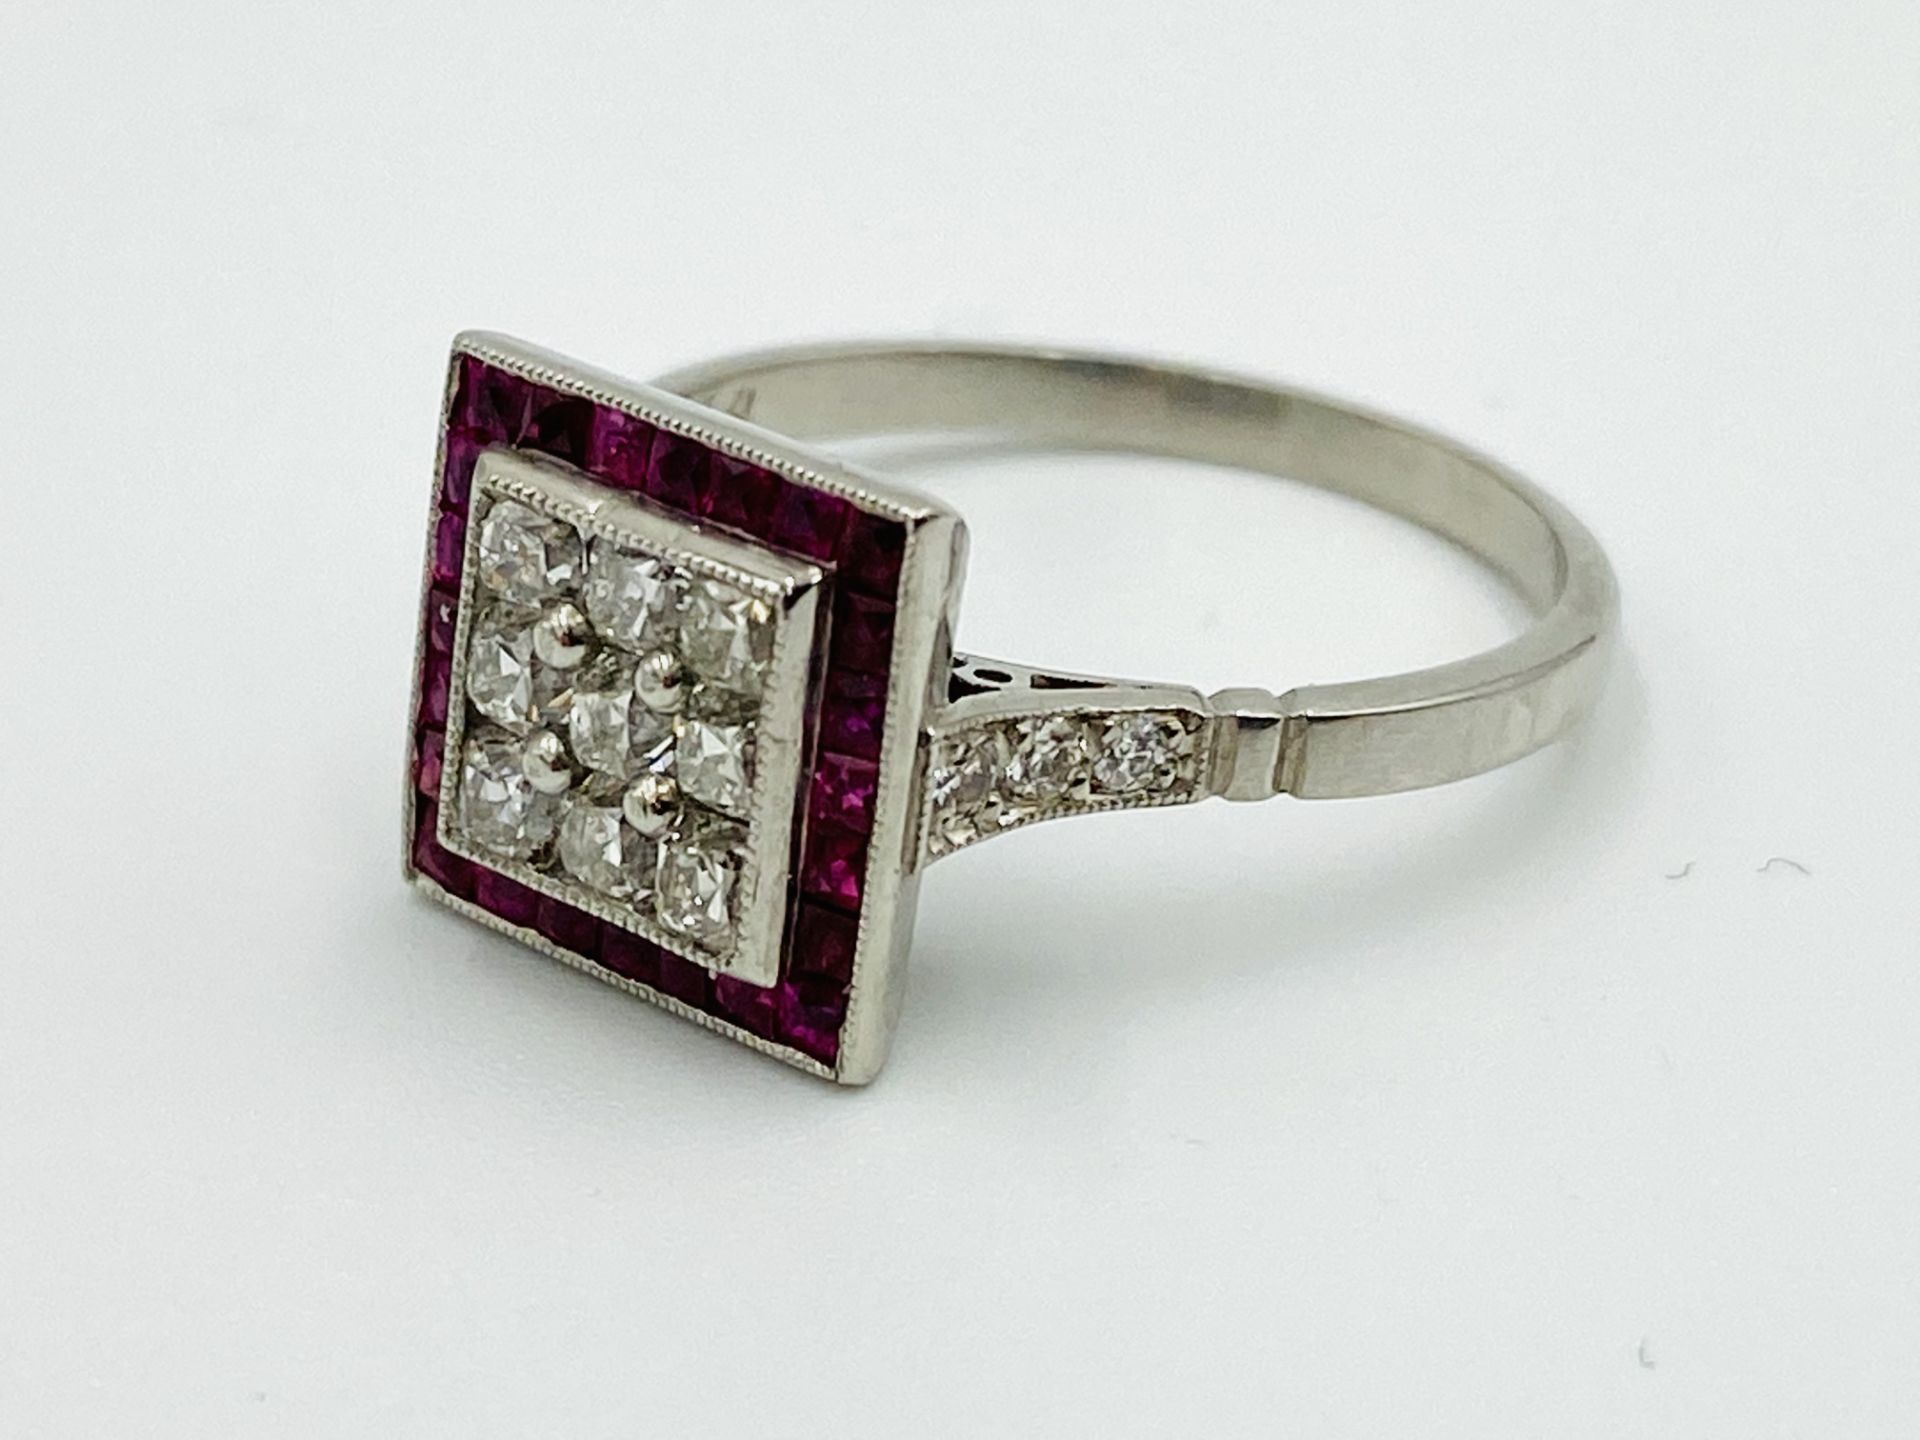 18ct white gold, diamond and ruby ring - Image 2 of 5